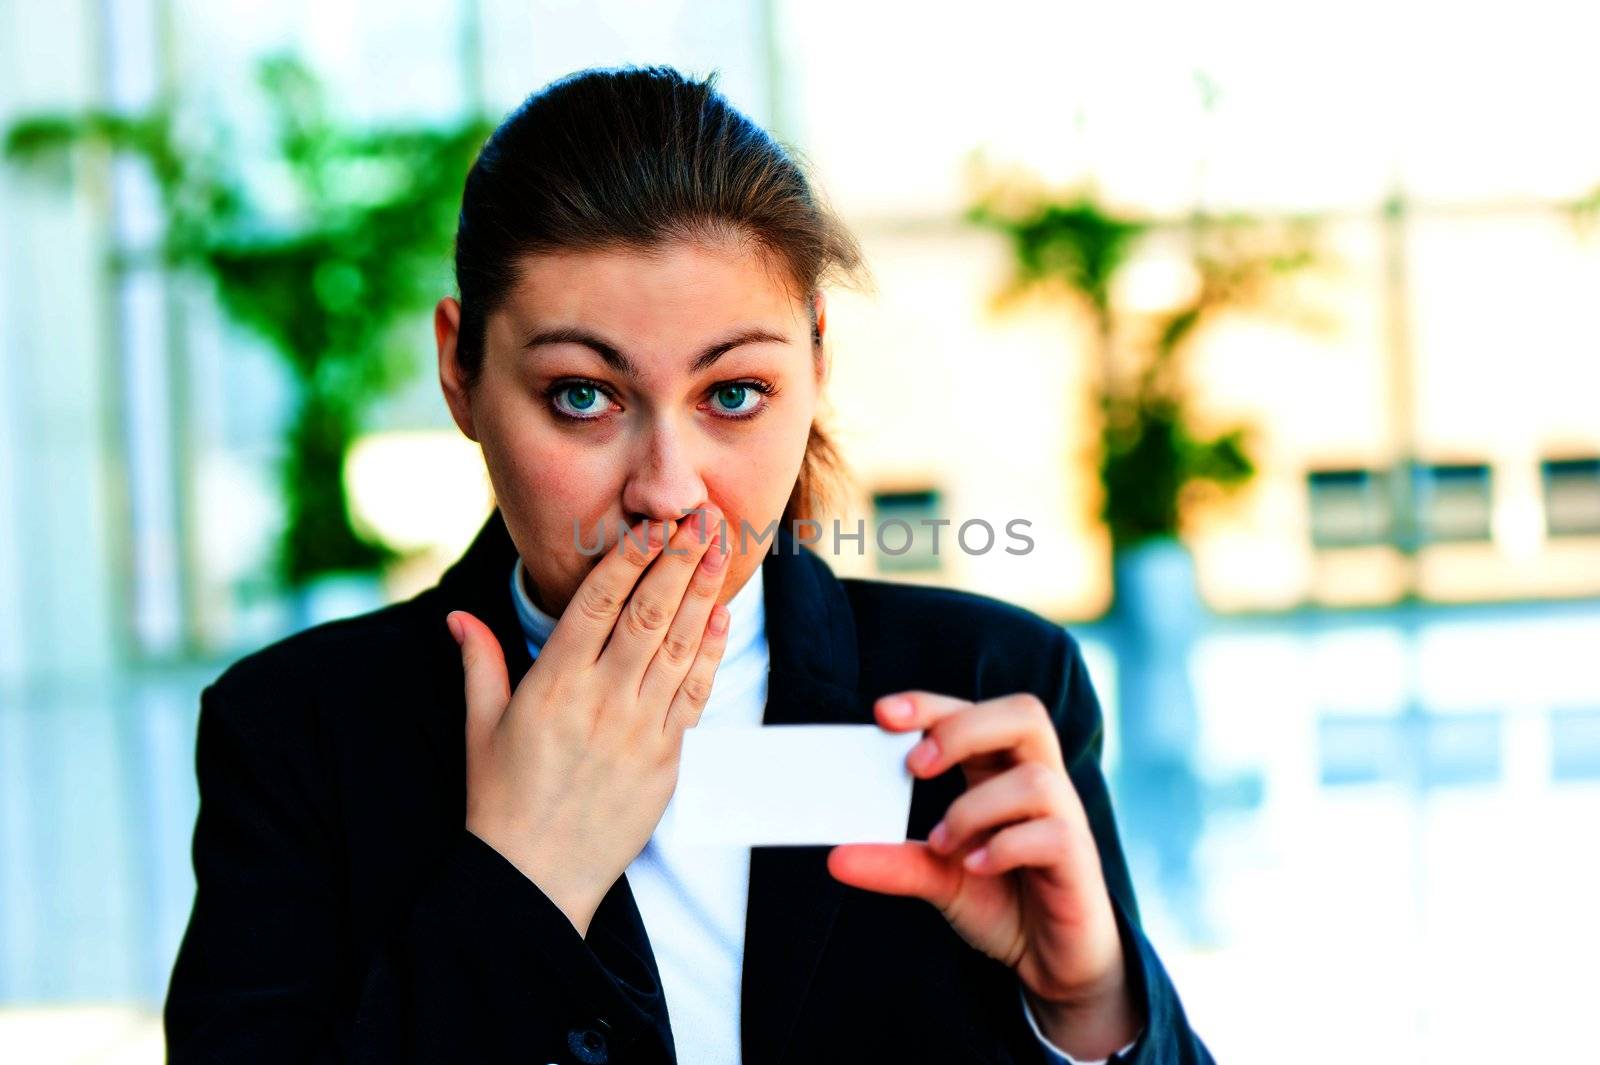 Dark-haired businesswoman with surprise looks at the business card by kosmsos111